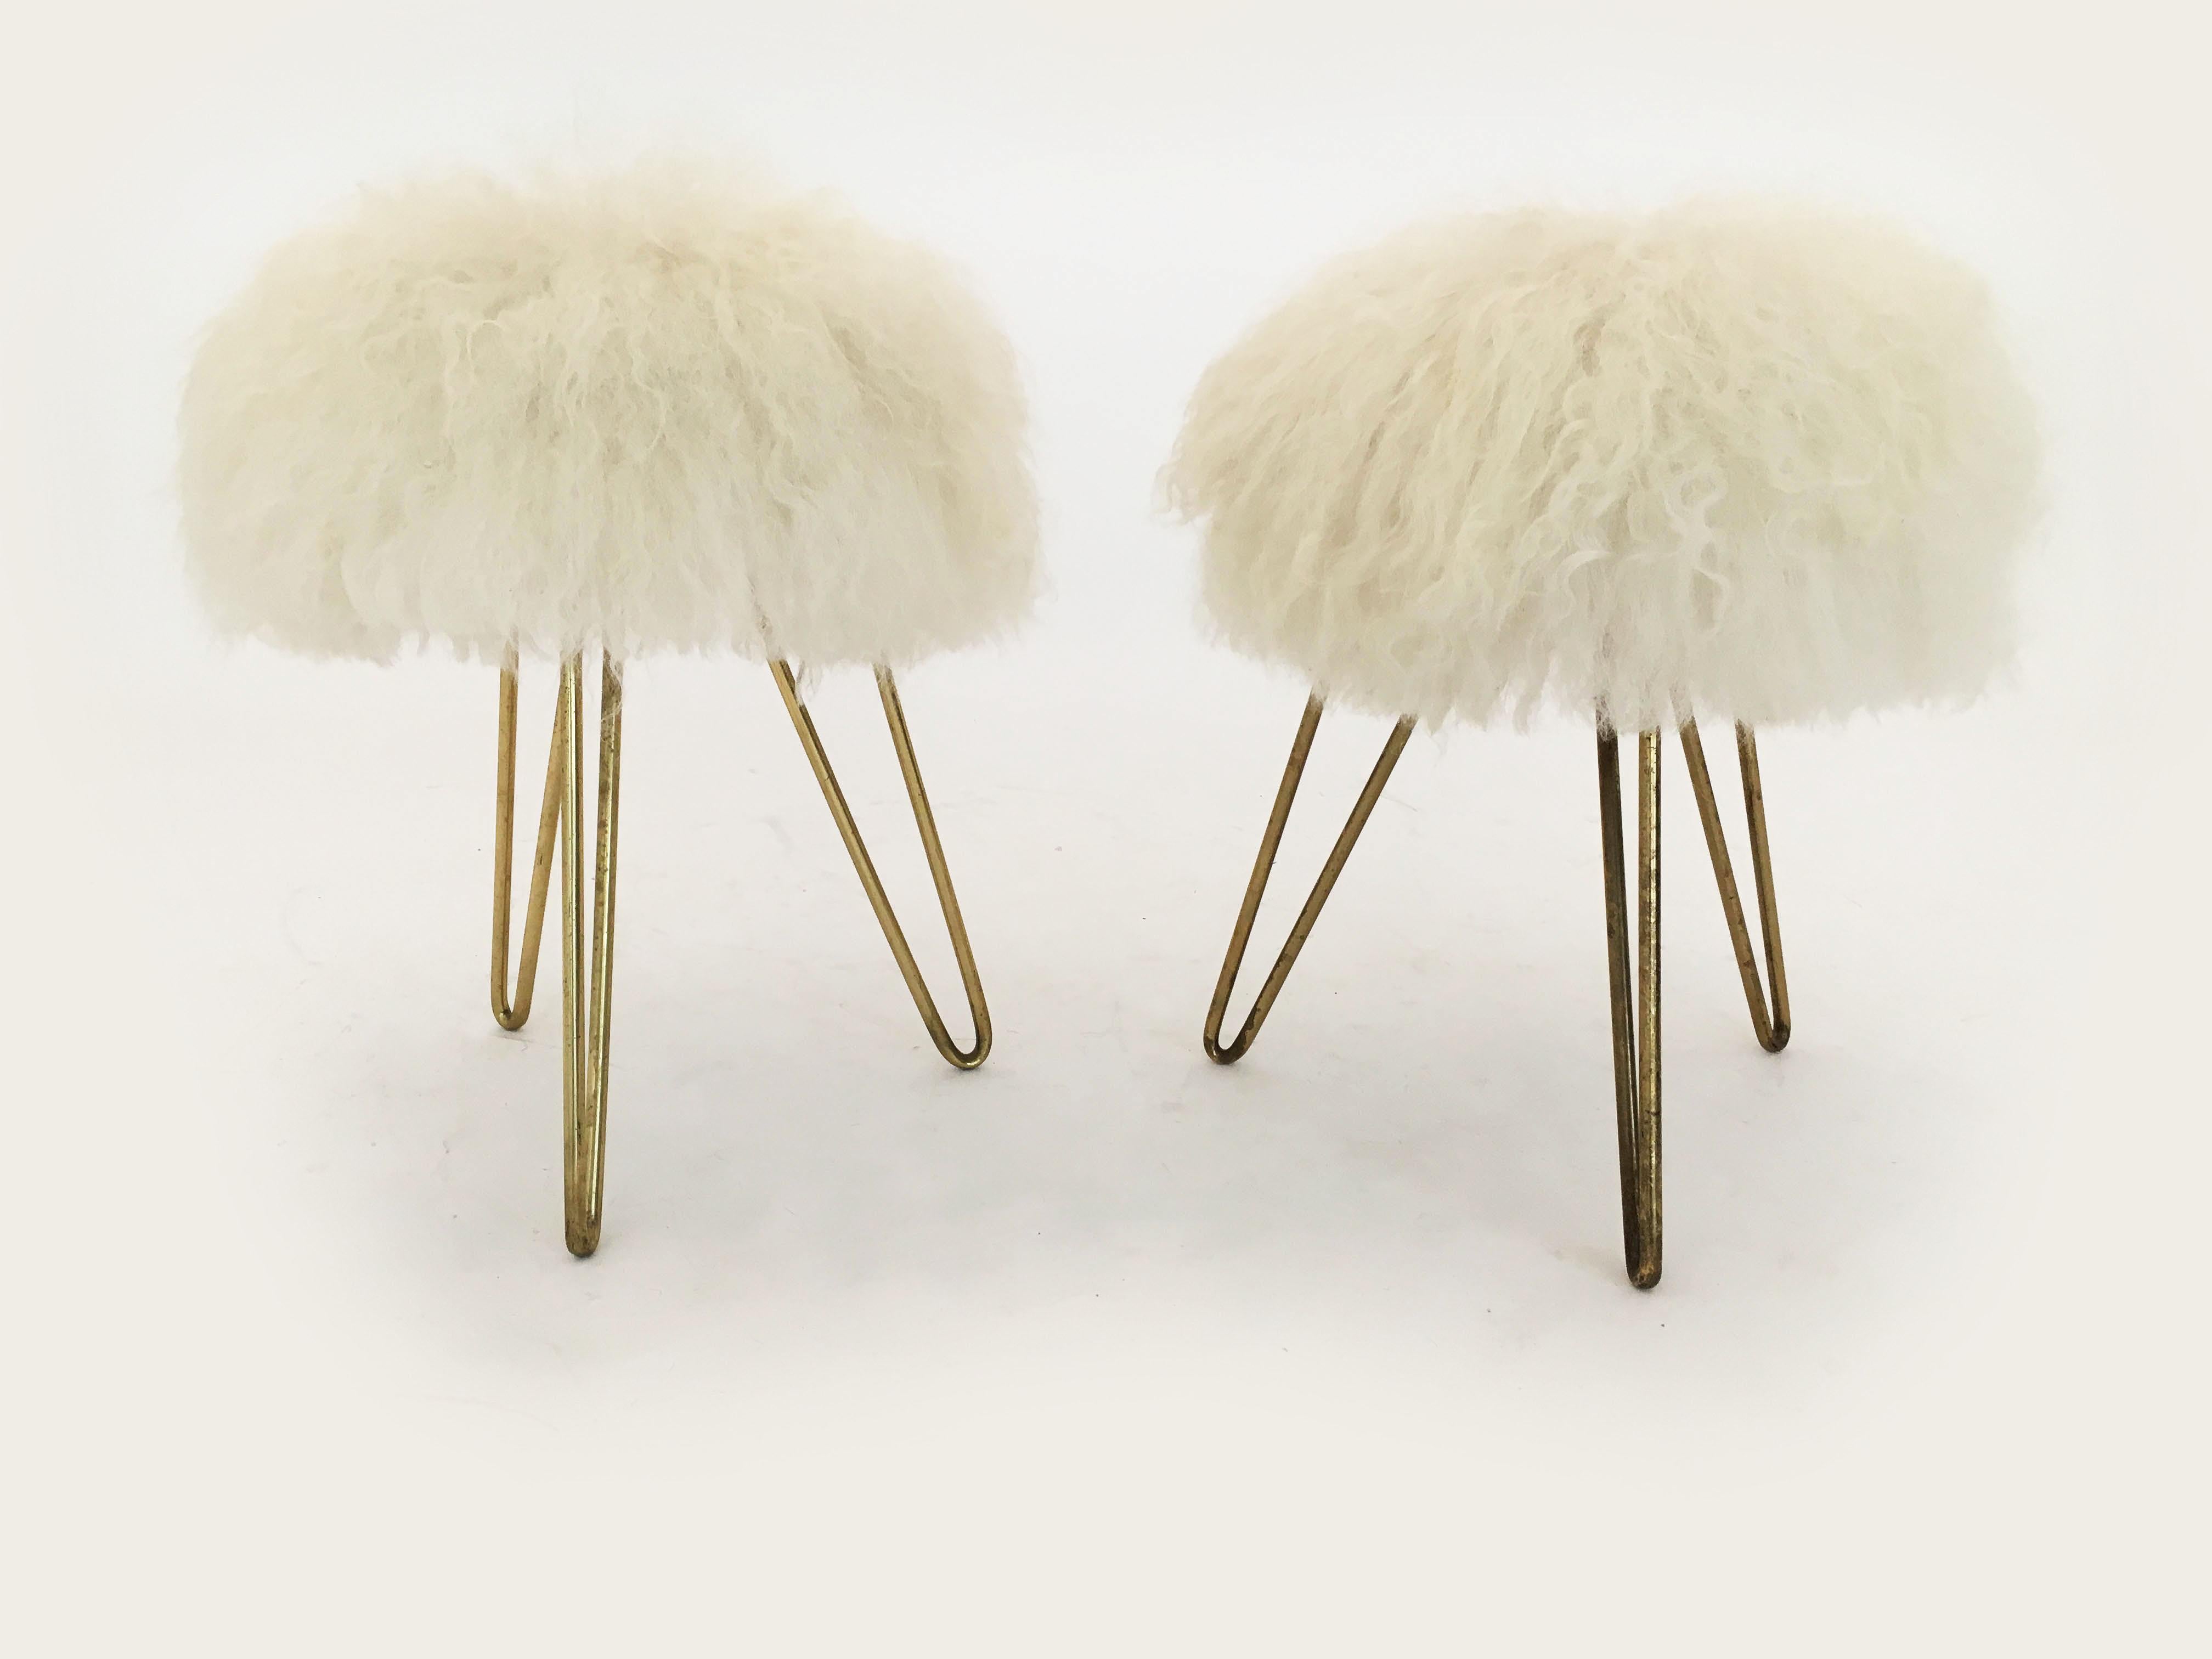 Delightful pair of sheep fur stools, France, 1950s. In excellent vintage condition with just the right amount of gently aged patina on the hair pin brass legs. The fur is clean and firm almost like new, although truly vintage from the 1950s and has